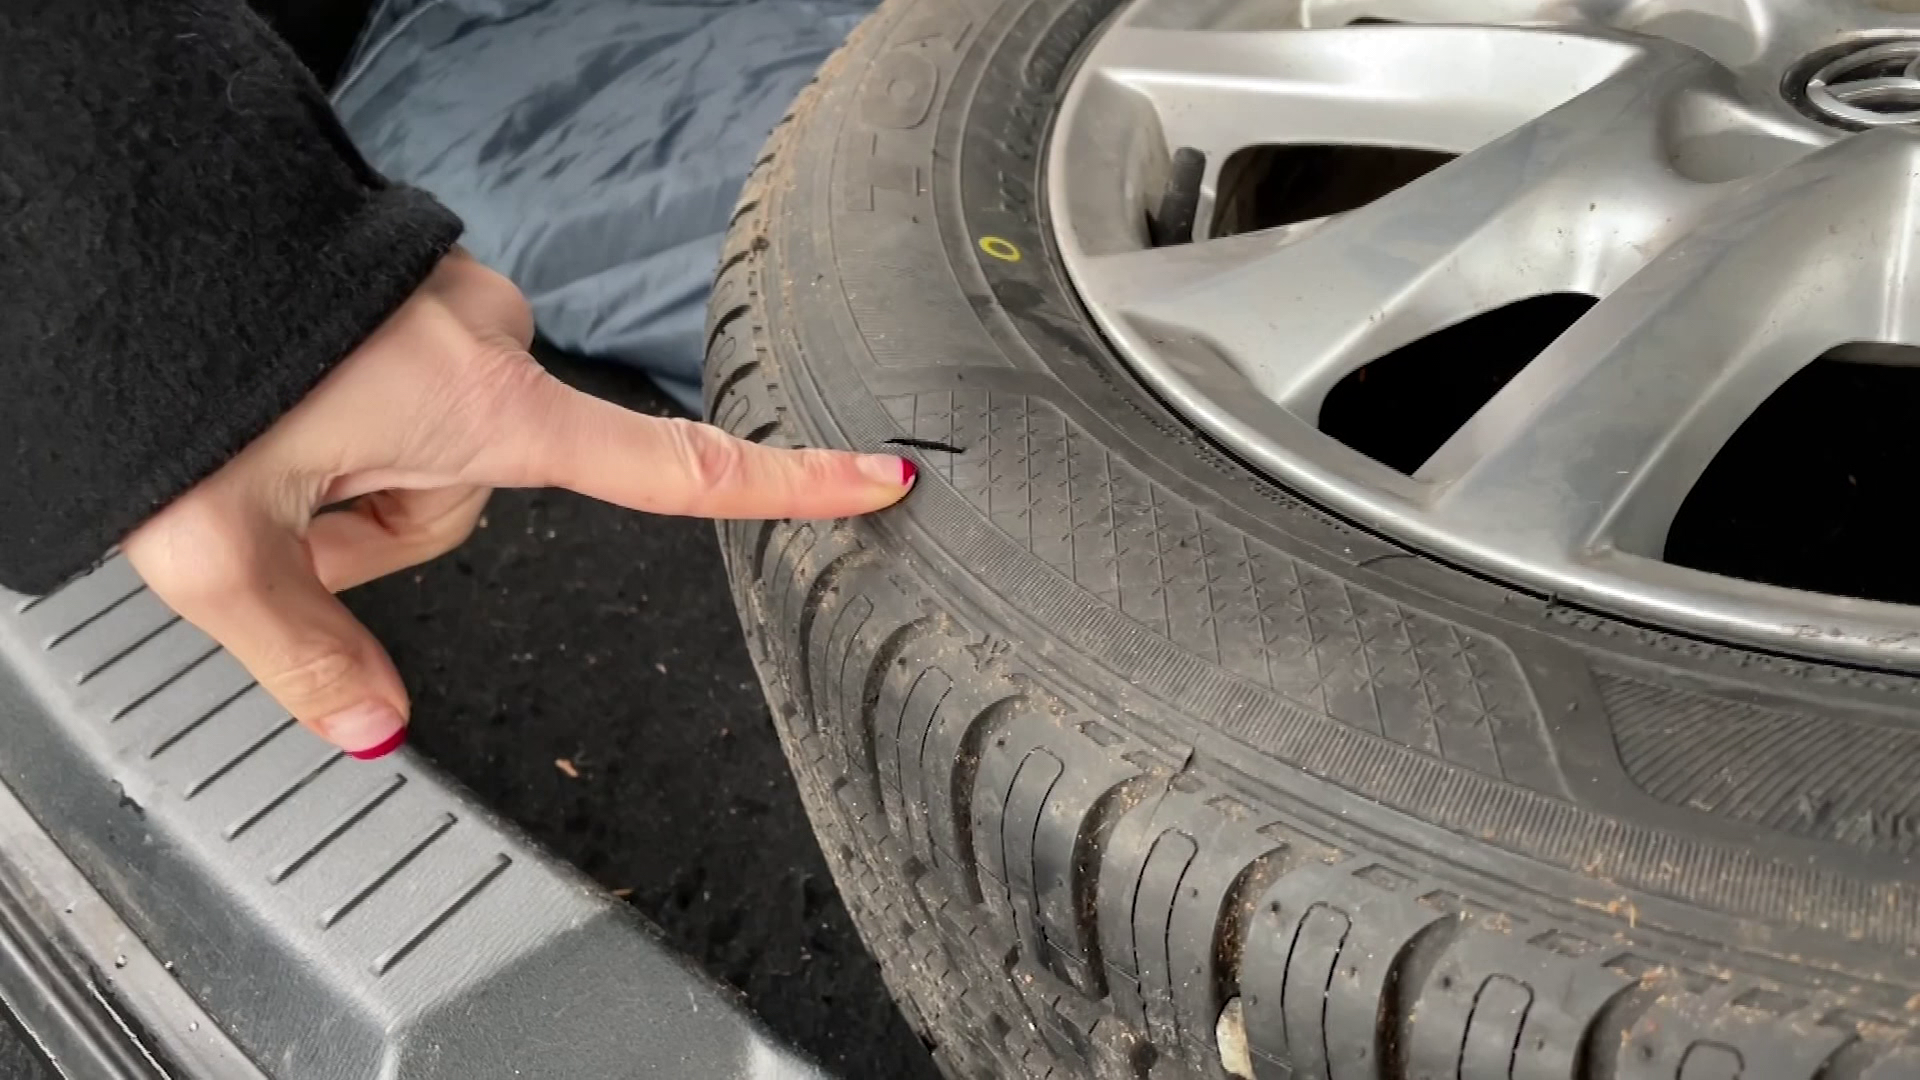 Vancouver crime: Family's tires slashed | CityNews Vancouver